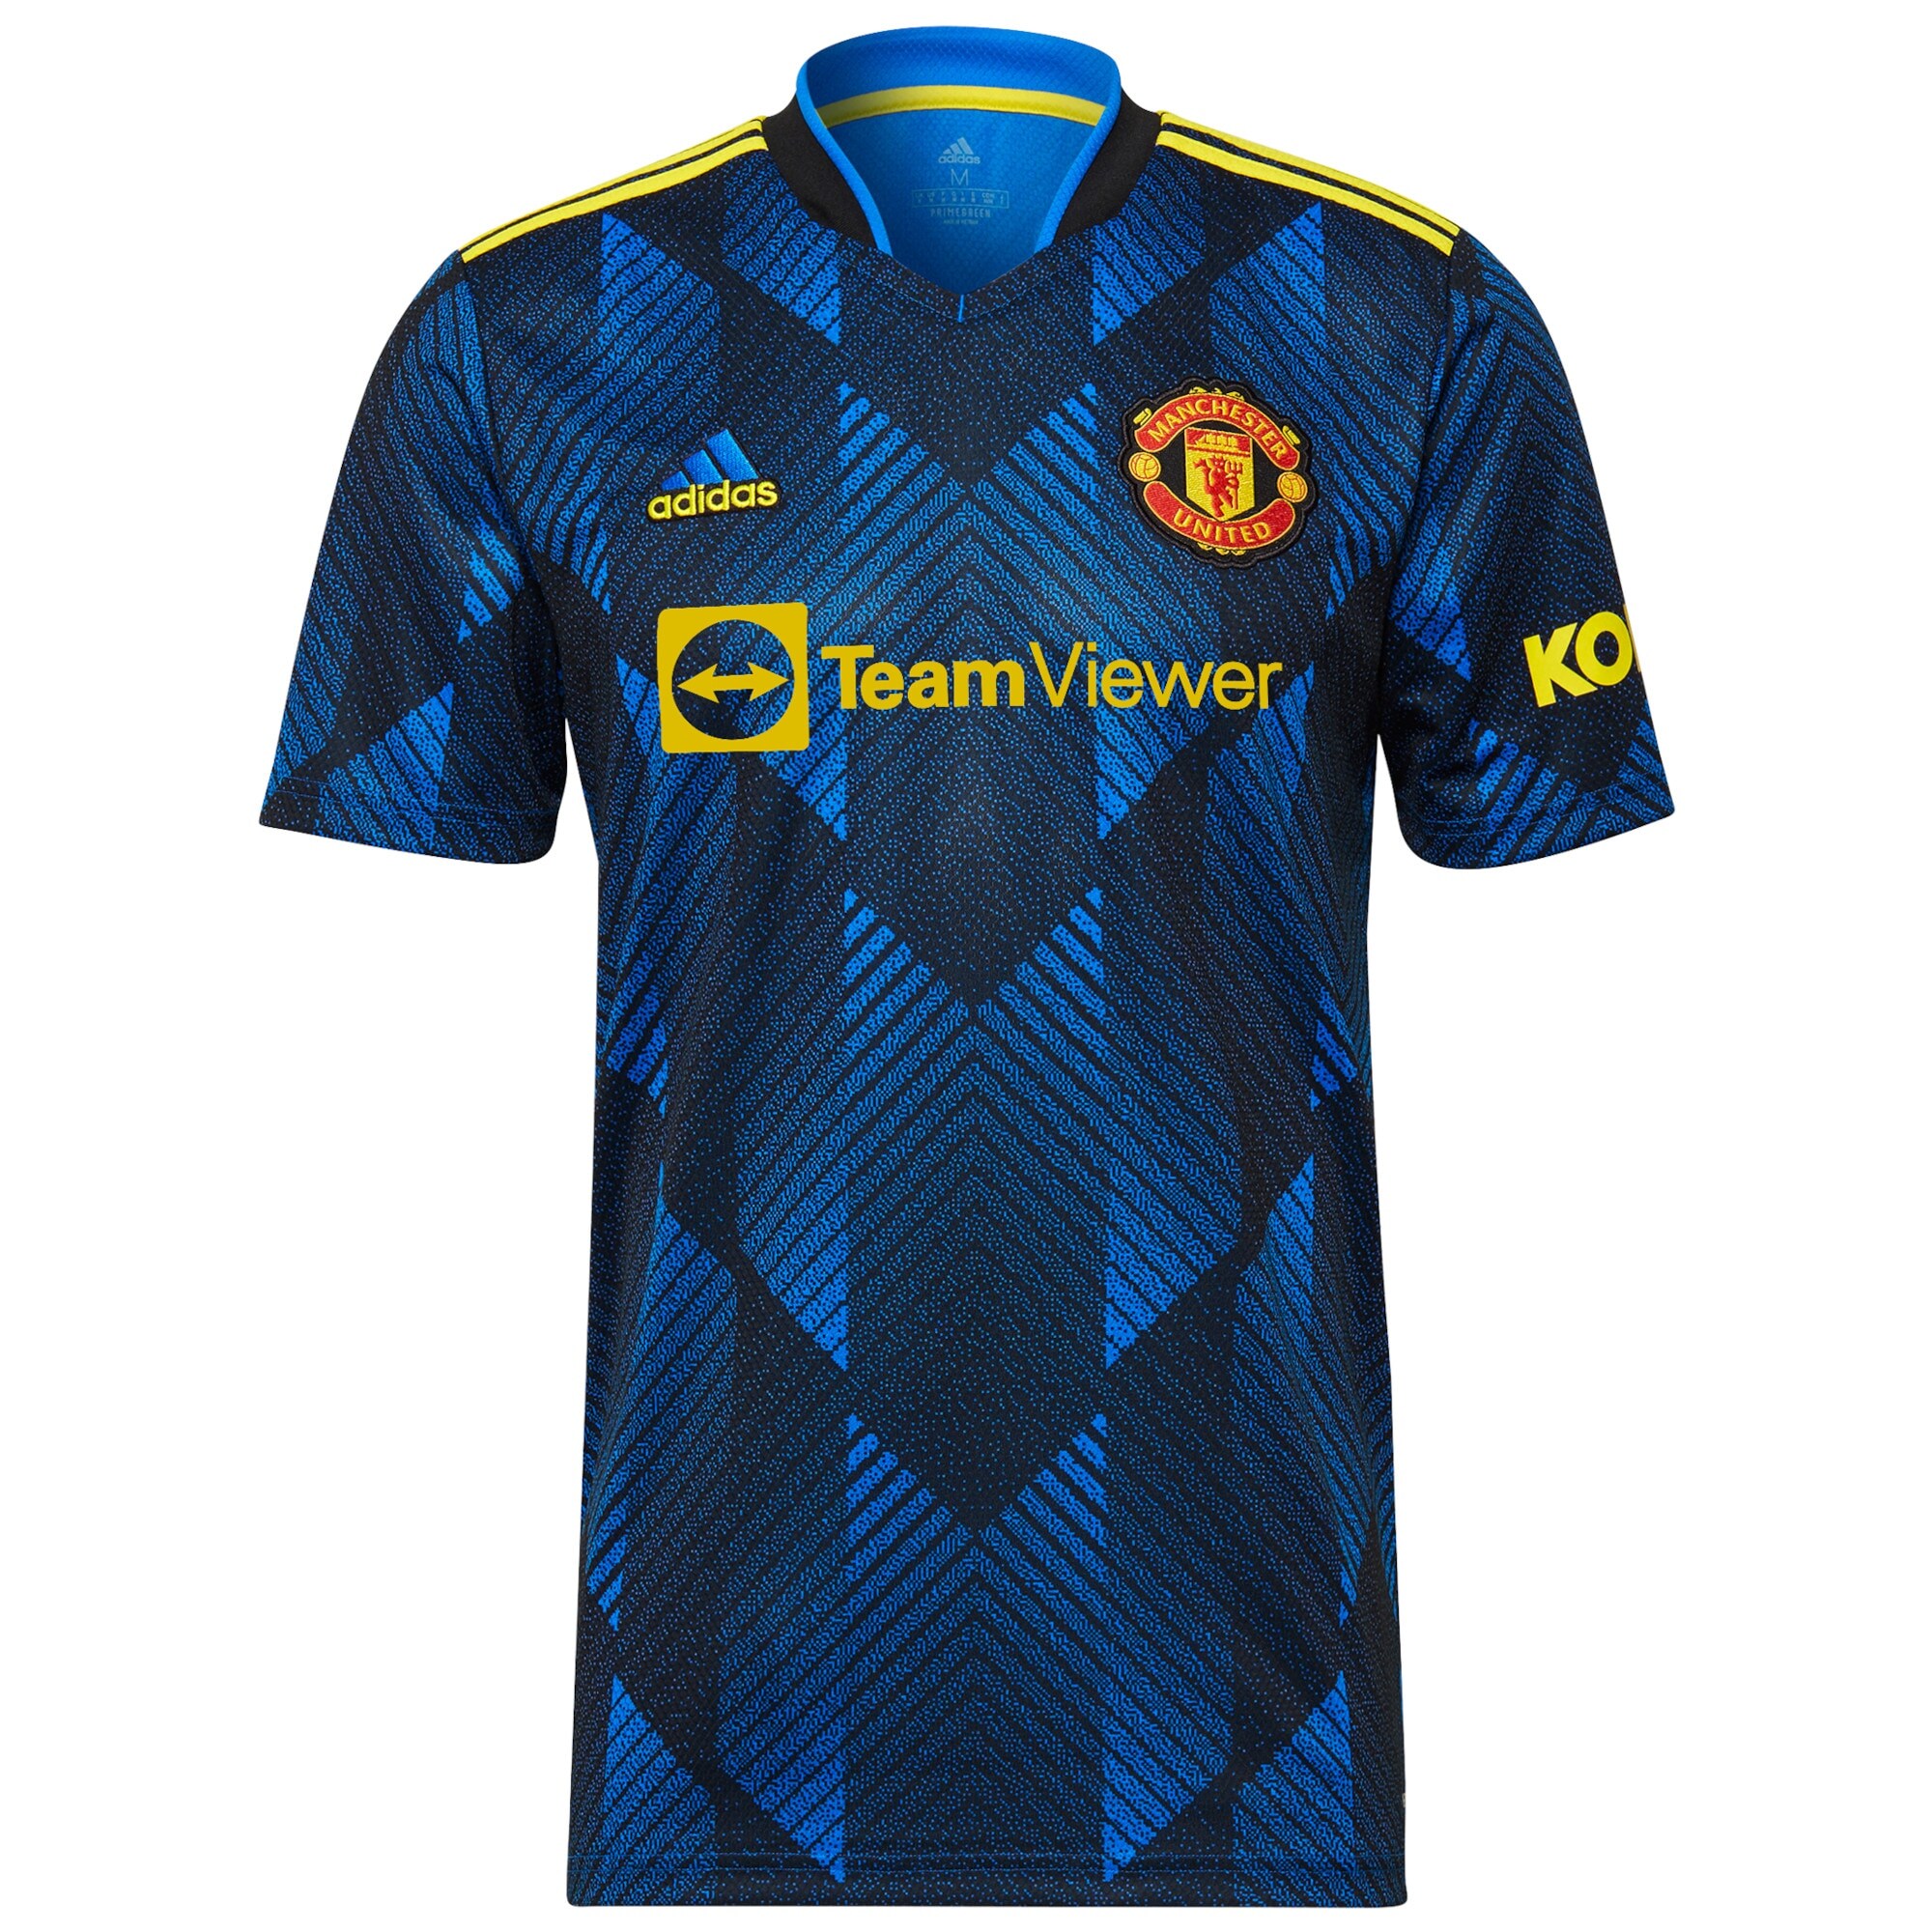 Manchester United Cup Third Shirt 2021-22 with James 21 printing